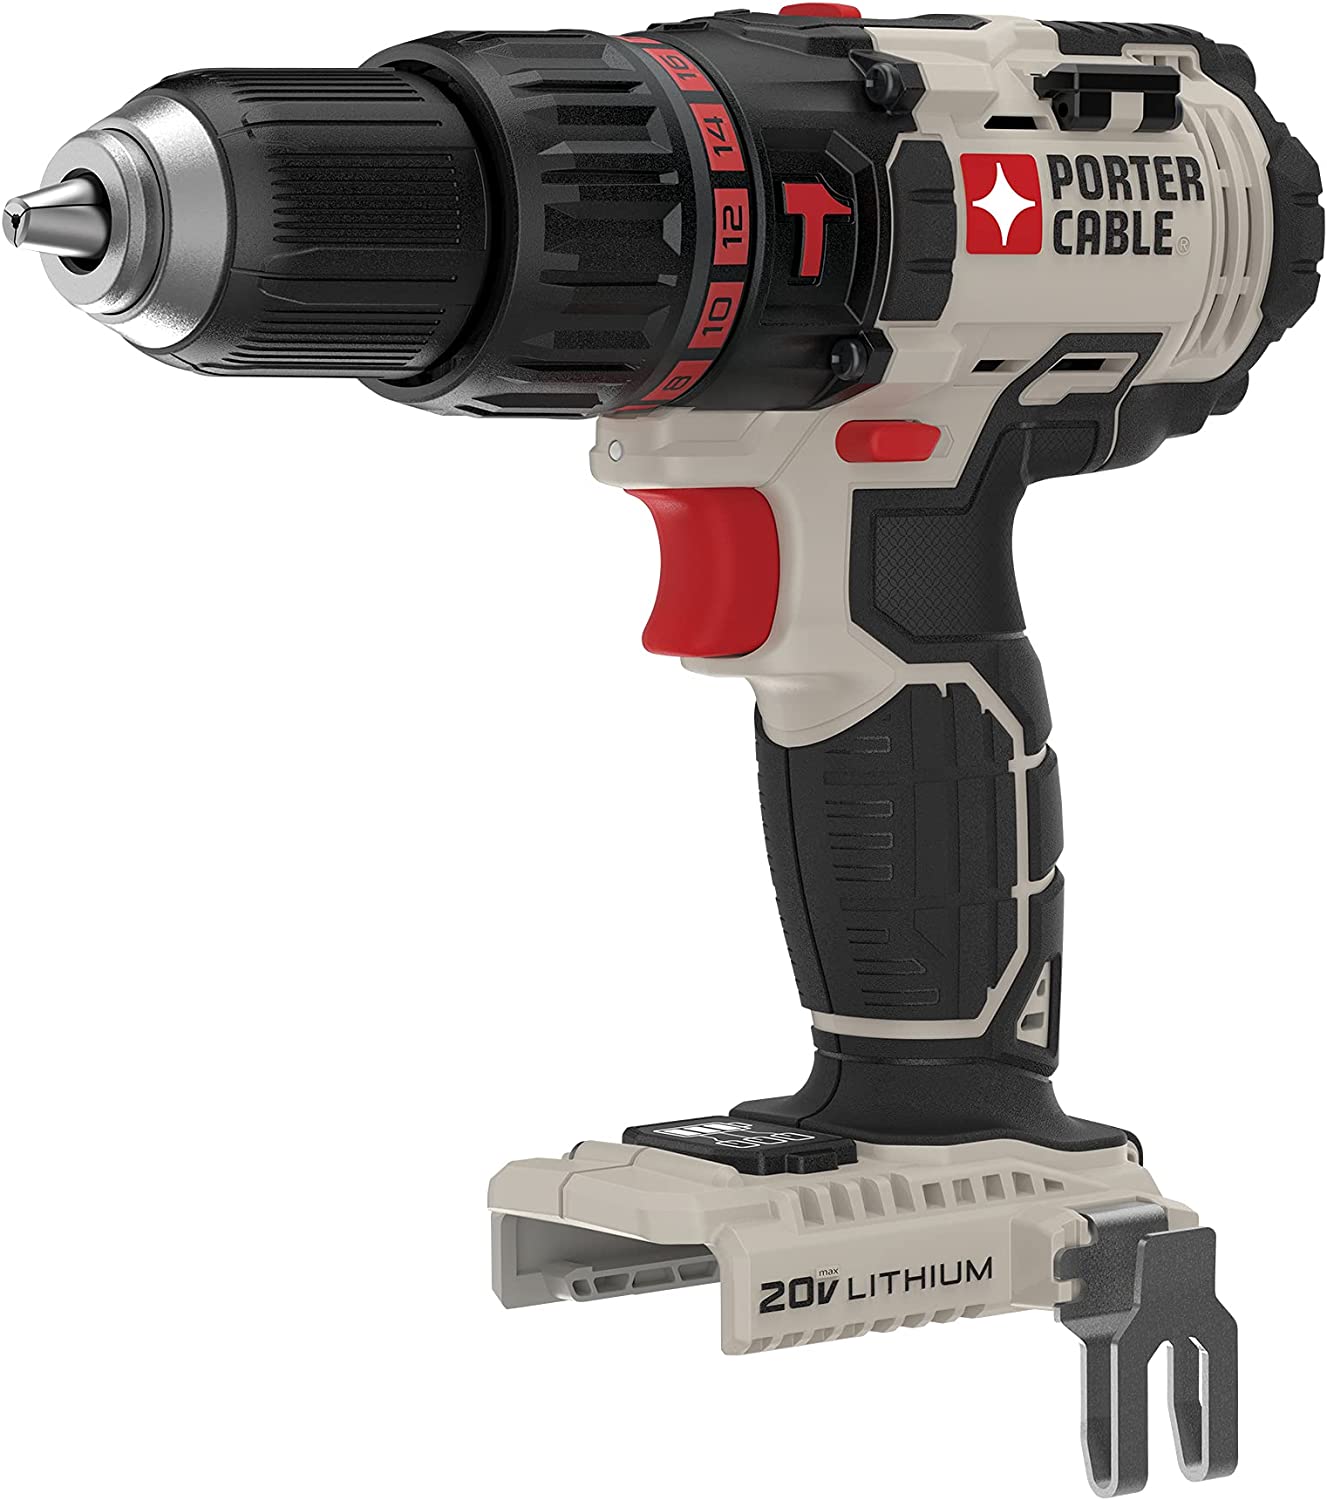 PORTER-CABLE 20V MAX Hammer Drill, Tool Only (PCC620B),Black Gray